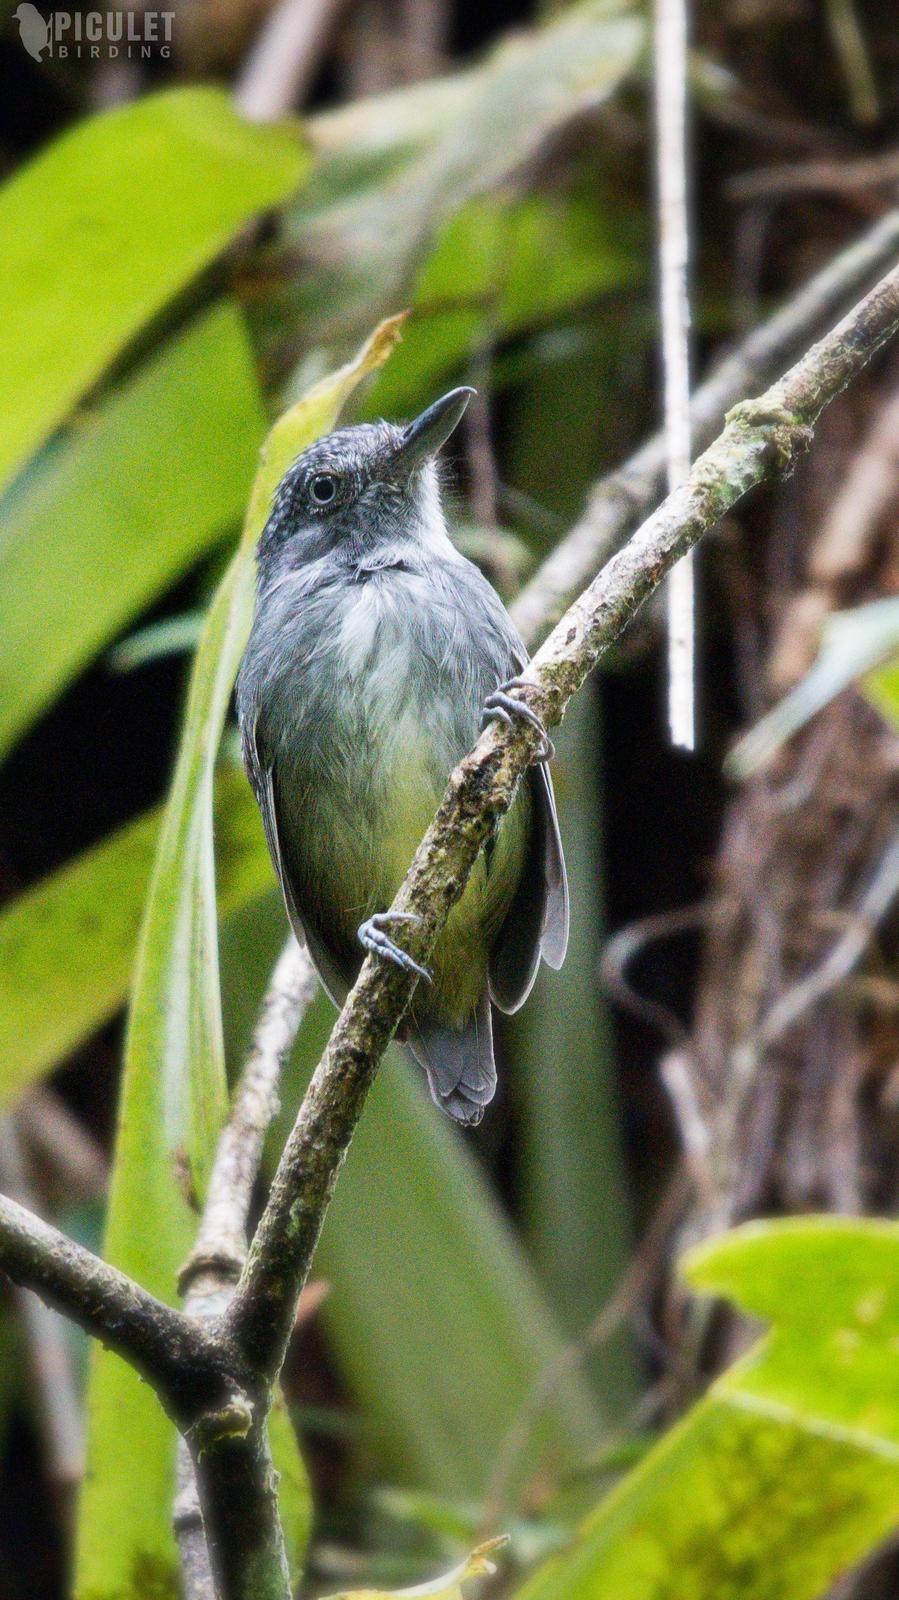 Spot-crowned Antvireo Photo by Julio Delgado